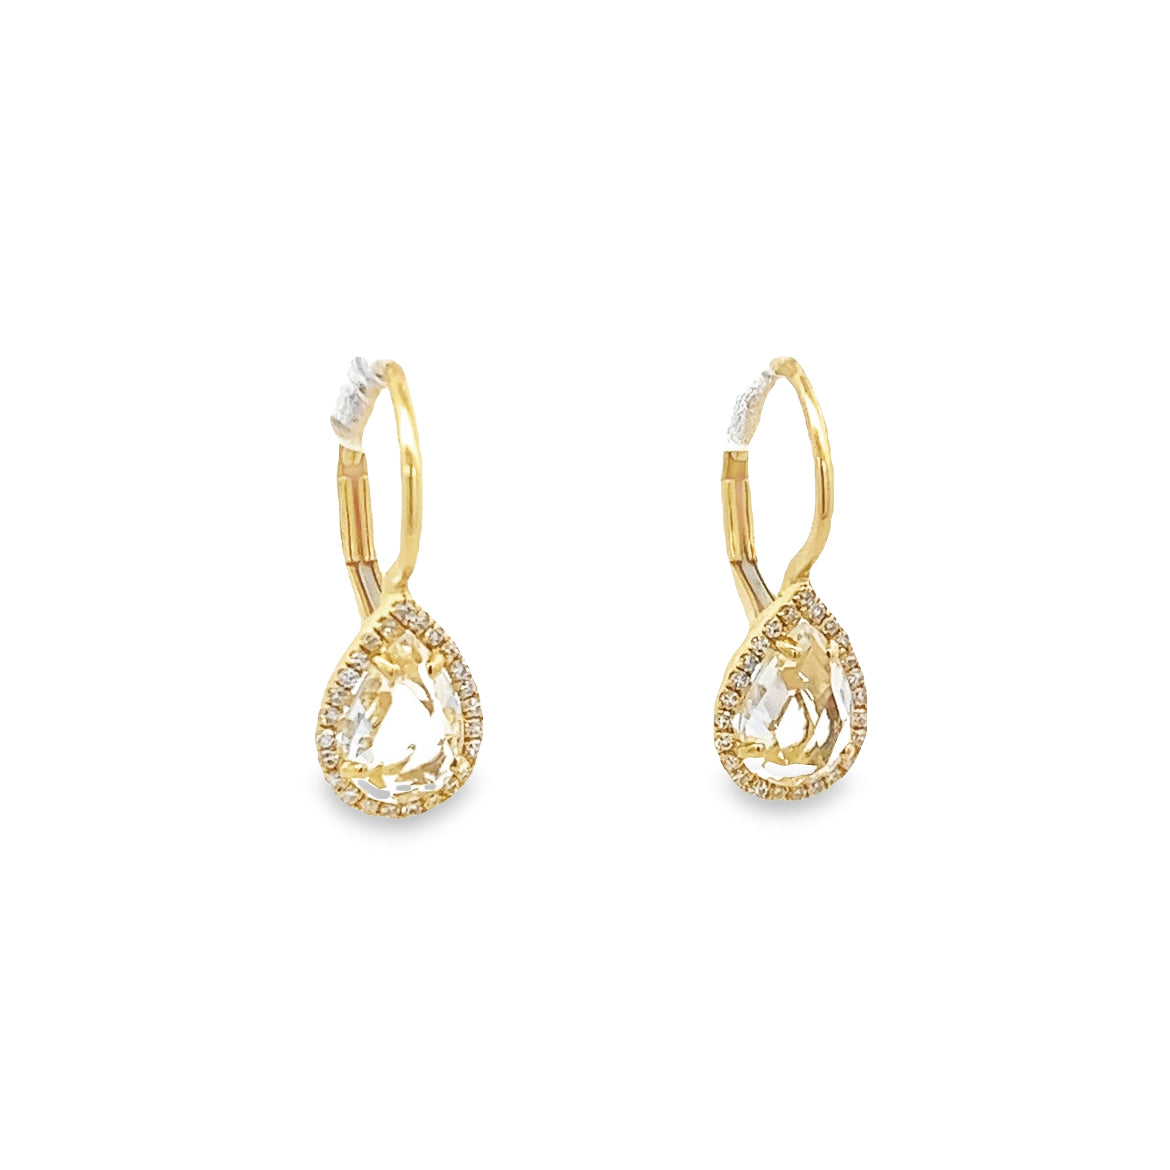 14K GOLD WHITE TOPAZ PEAR CUT AND HALO EARRINGS